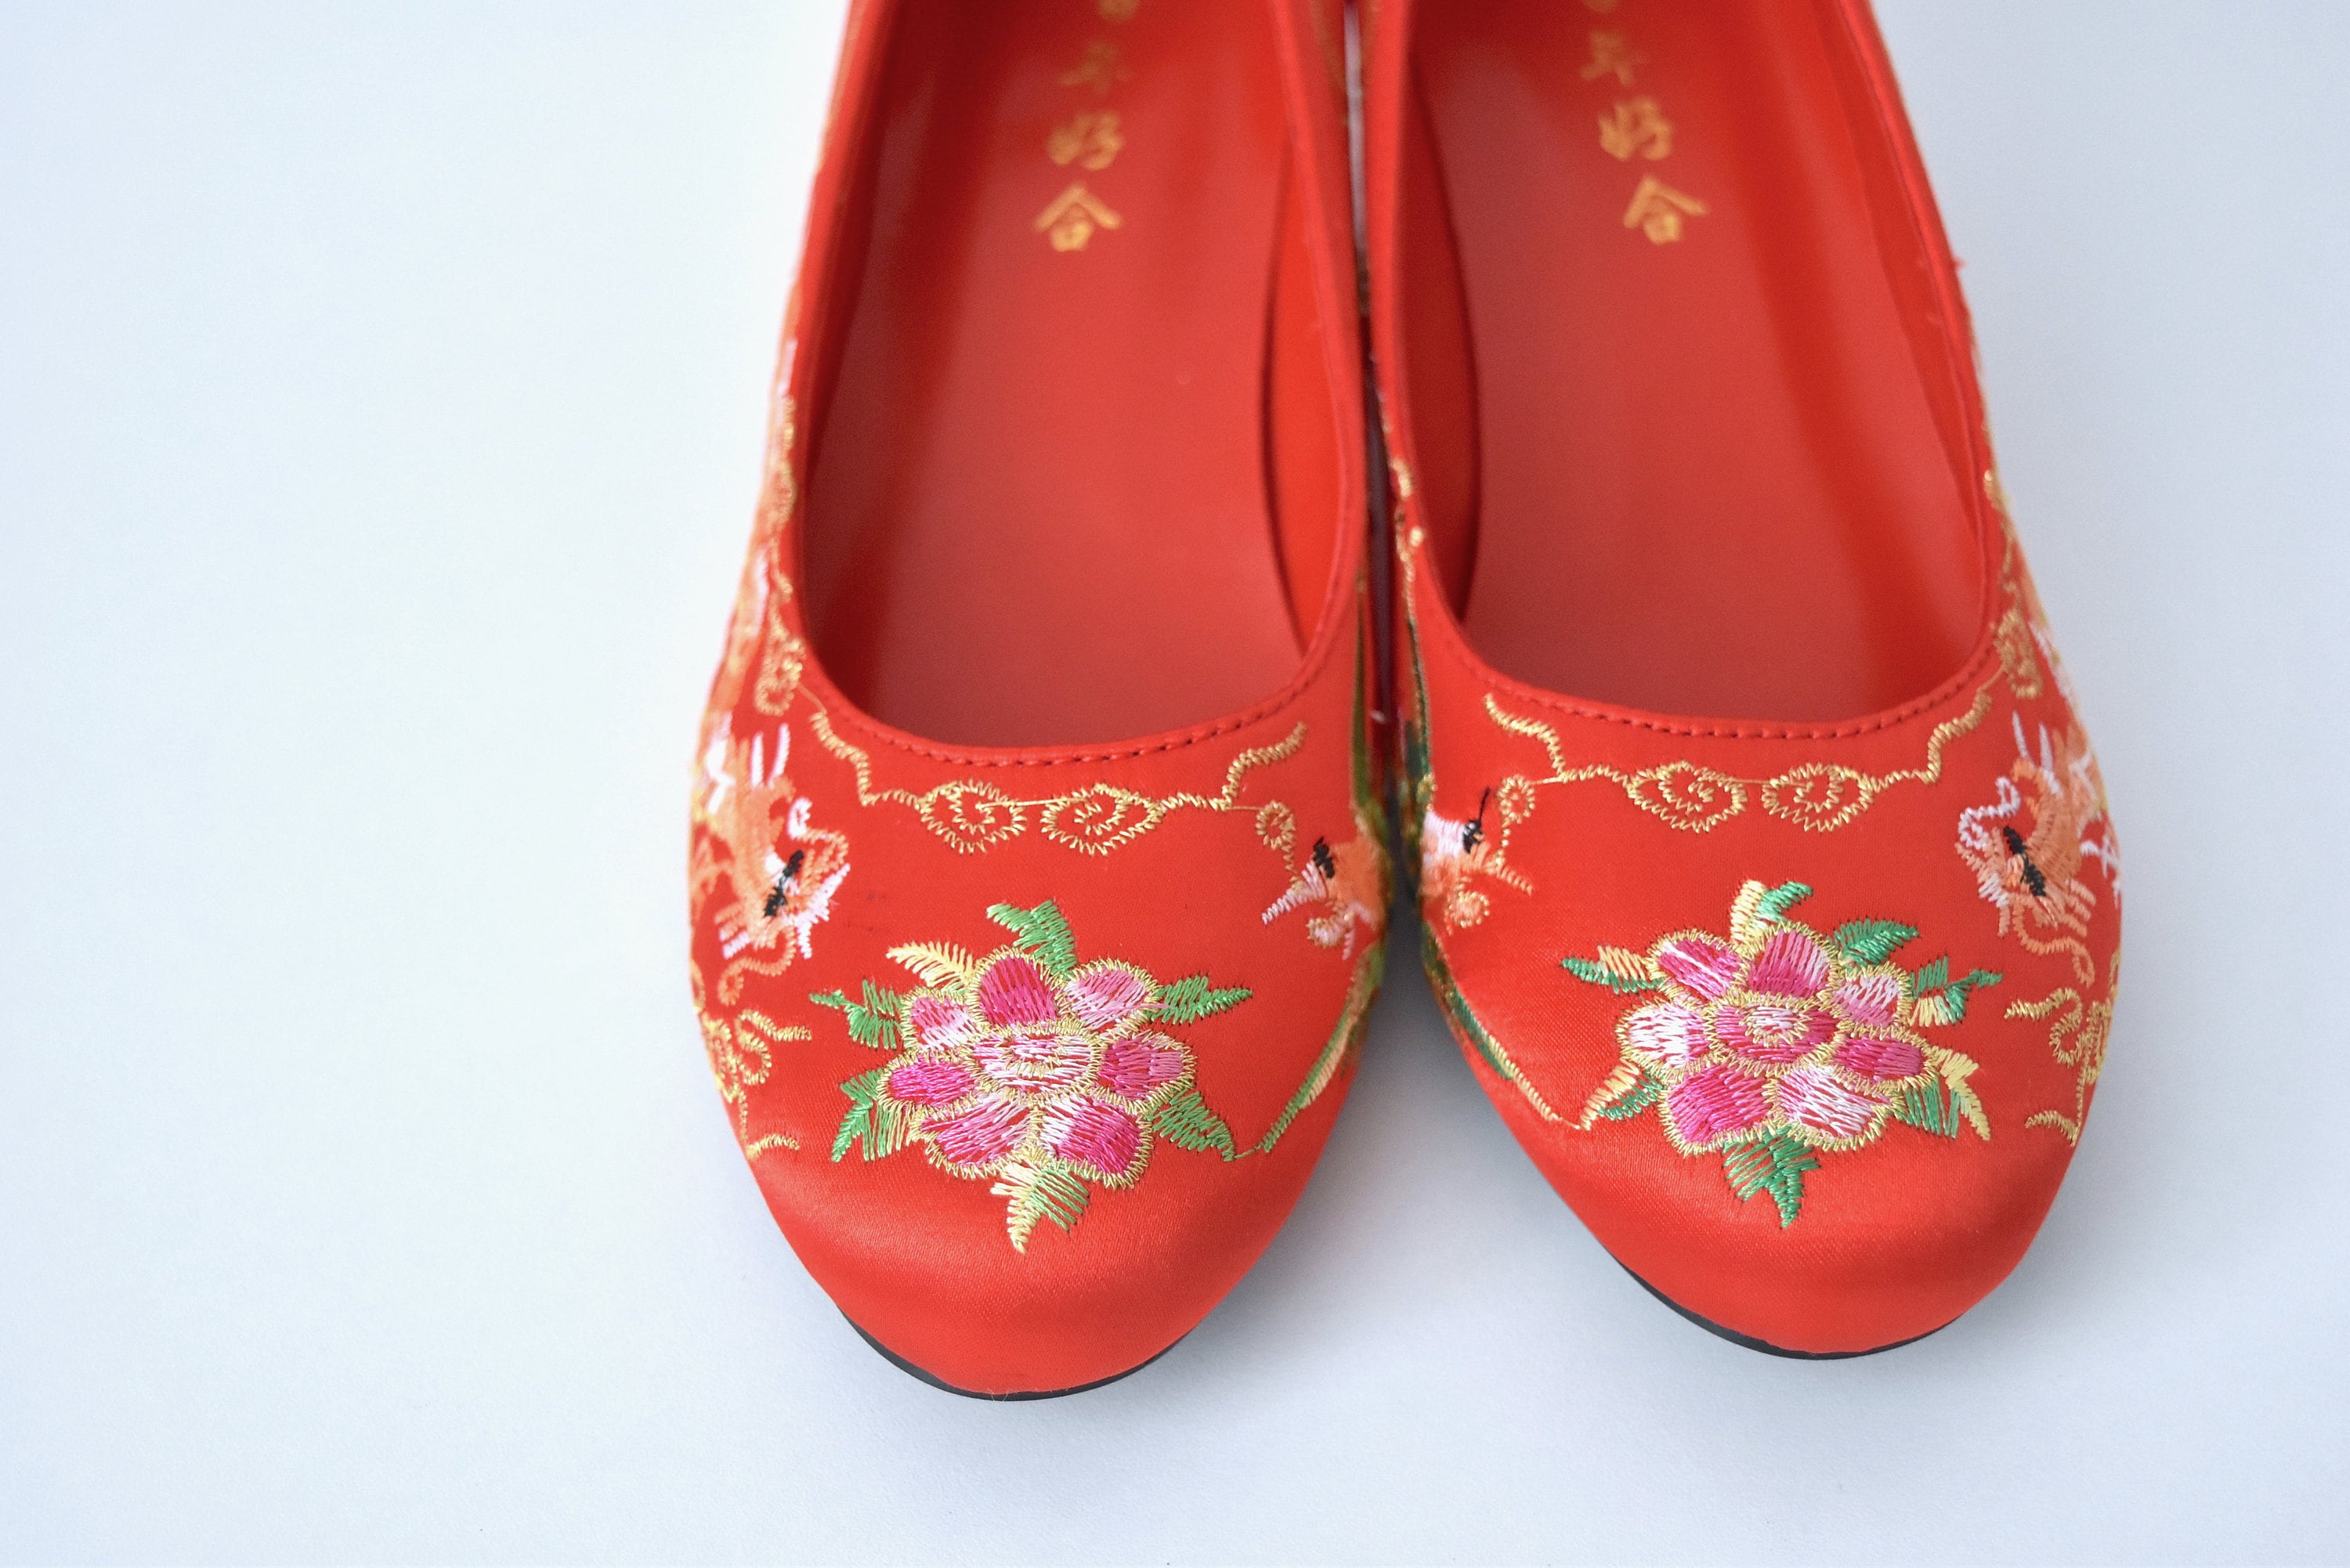 Traditional Pair Red Wedding Shoes Worn Stock Photo 1059858125 |  Shutterstock